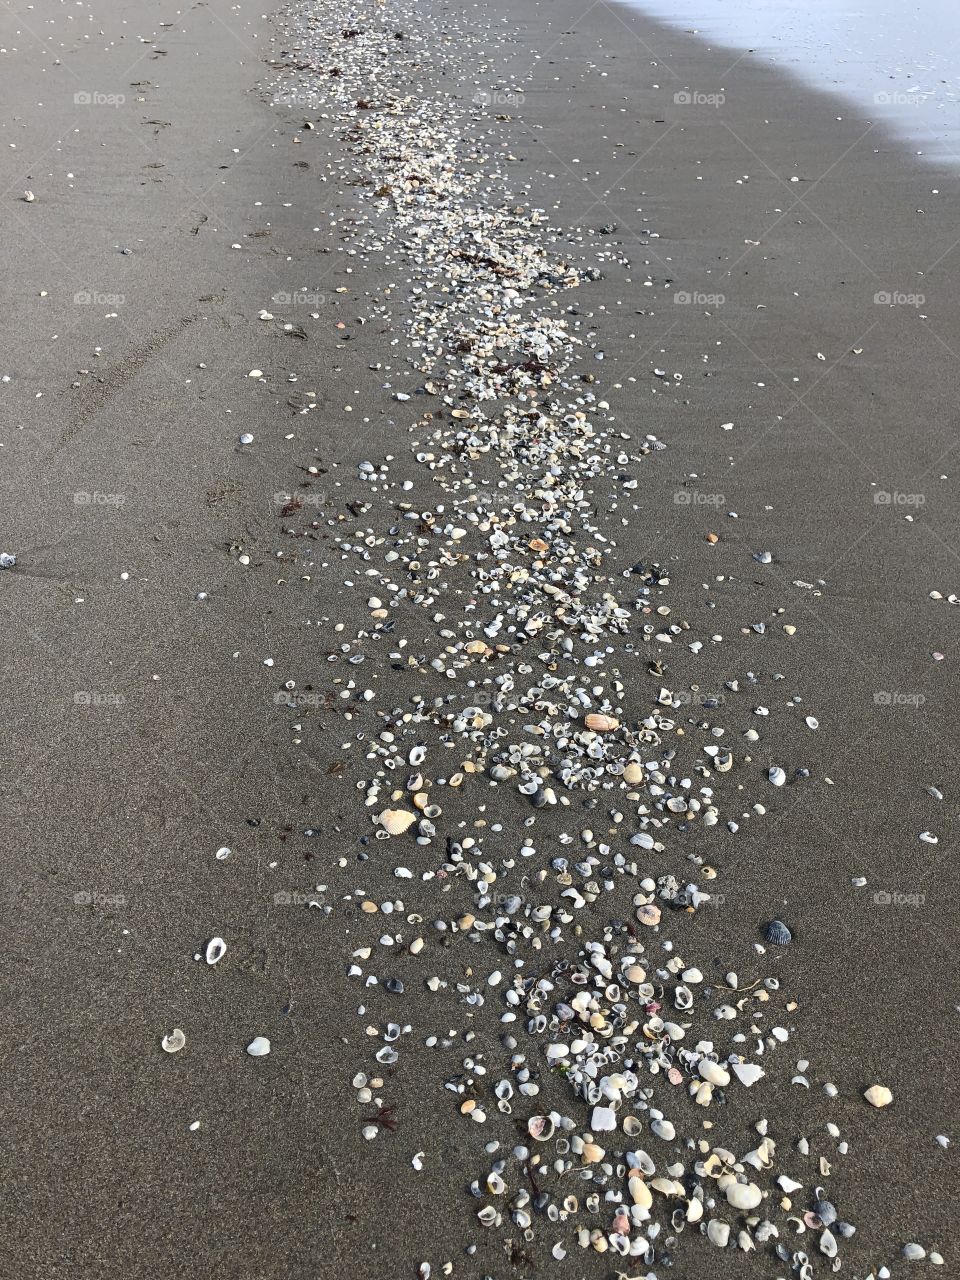 Tiny shells in the sand